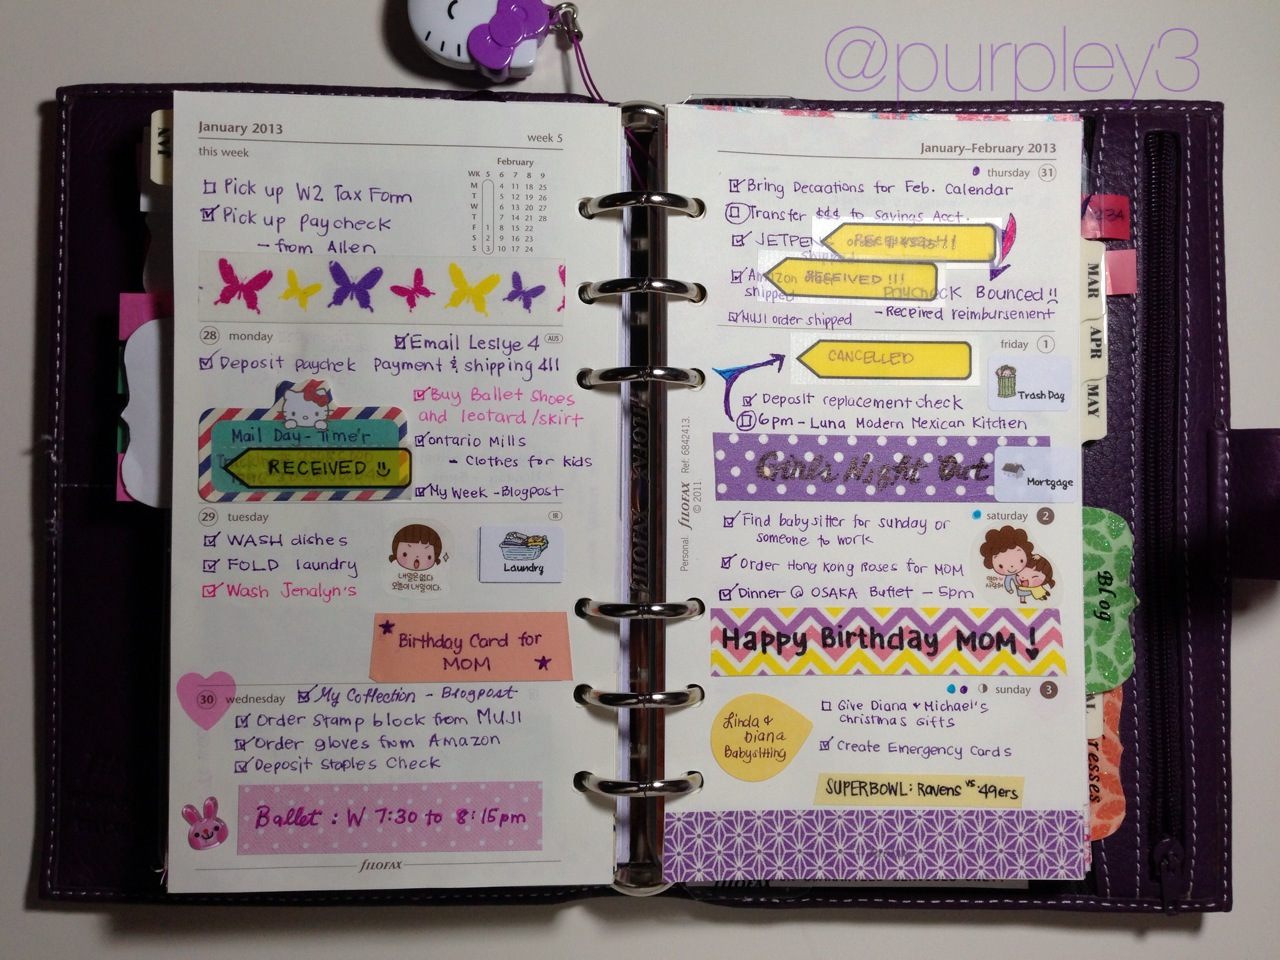 How to Decorate Your Planner with Washi Tape - The Chic Life